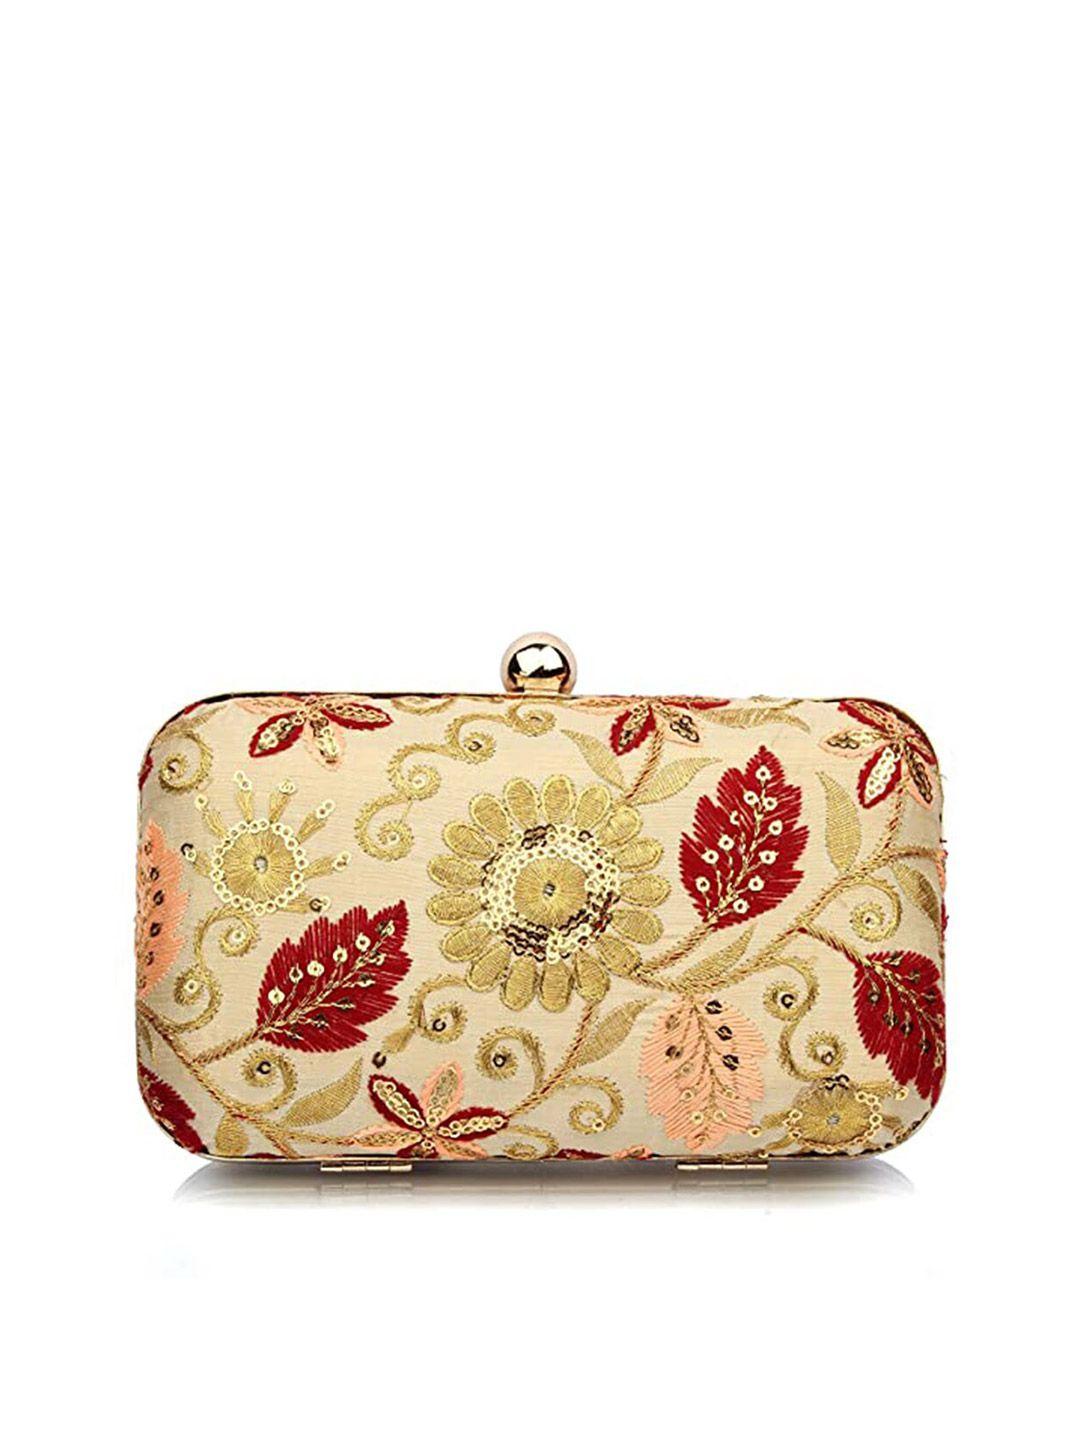 style shoes beige & green embroidered embroidered box clutch